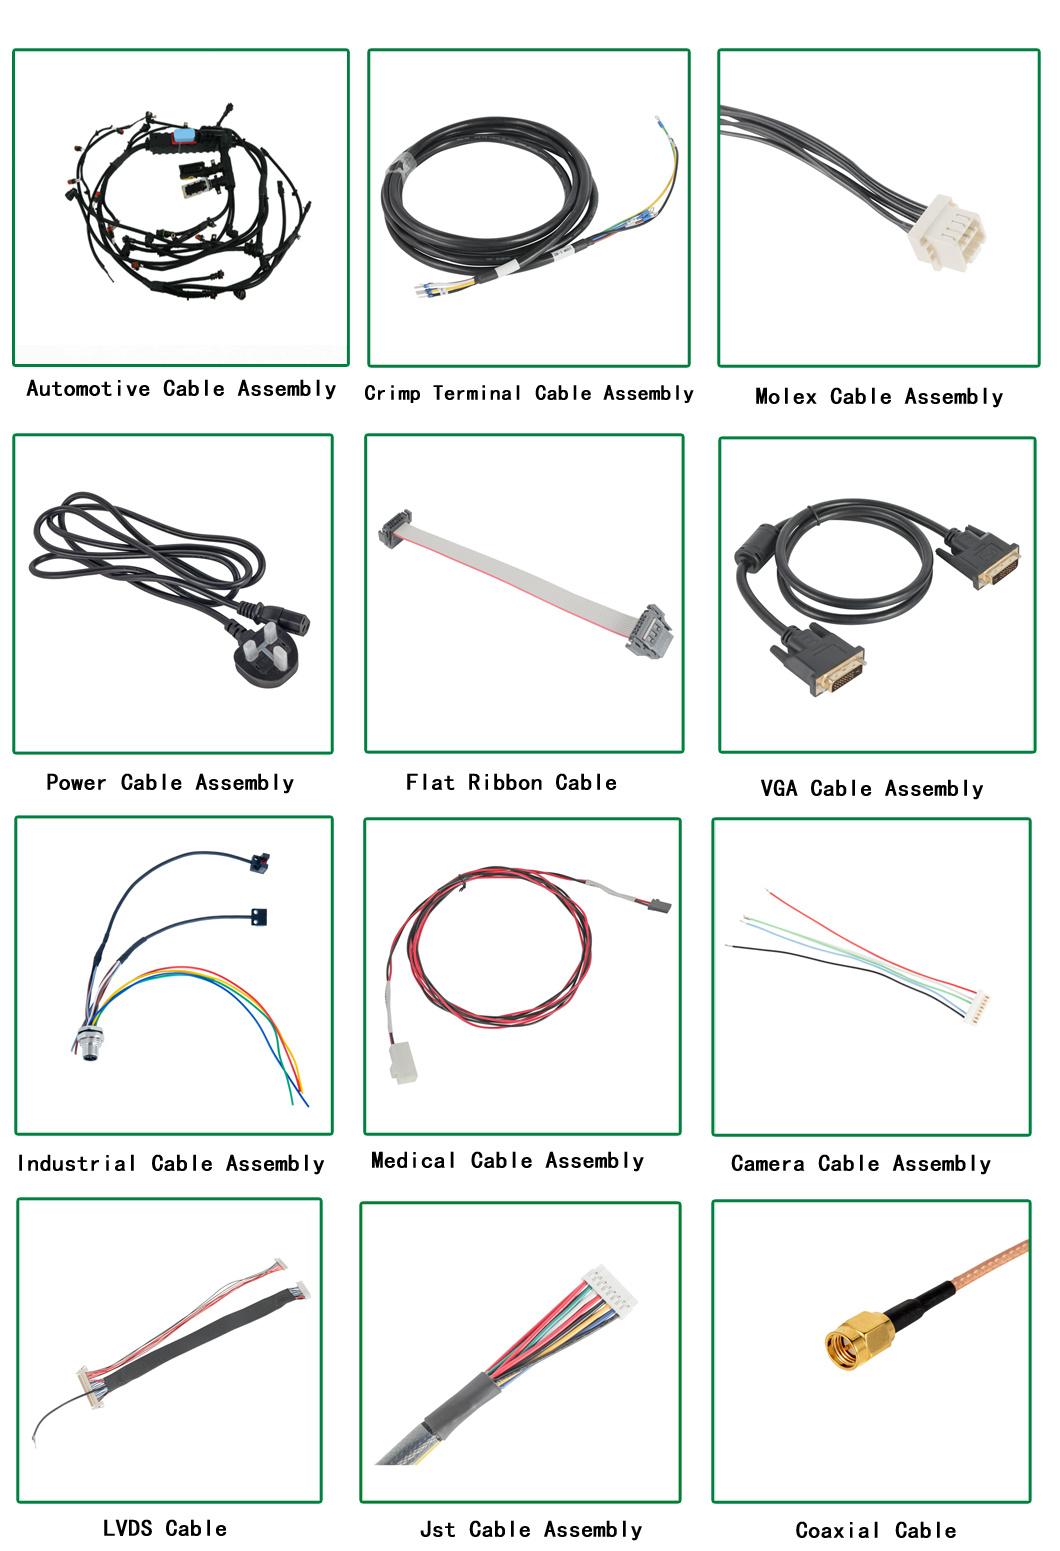 Industrial Cable Assembly/Wiring Harness for Automation